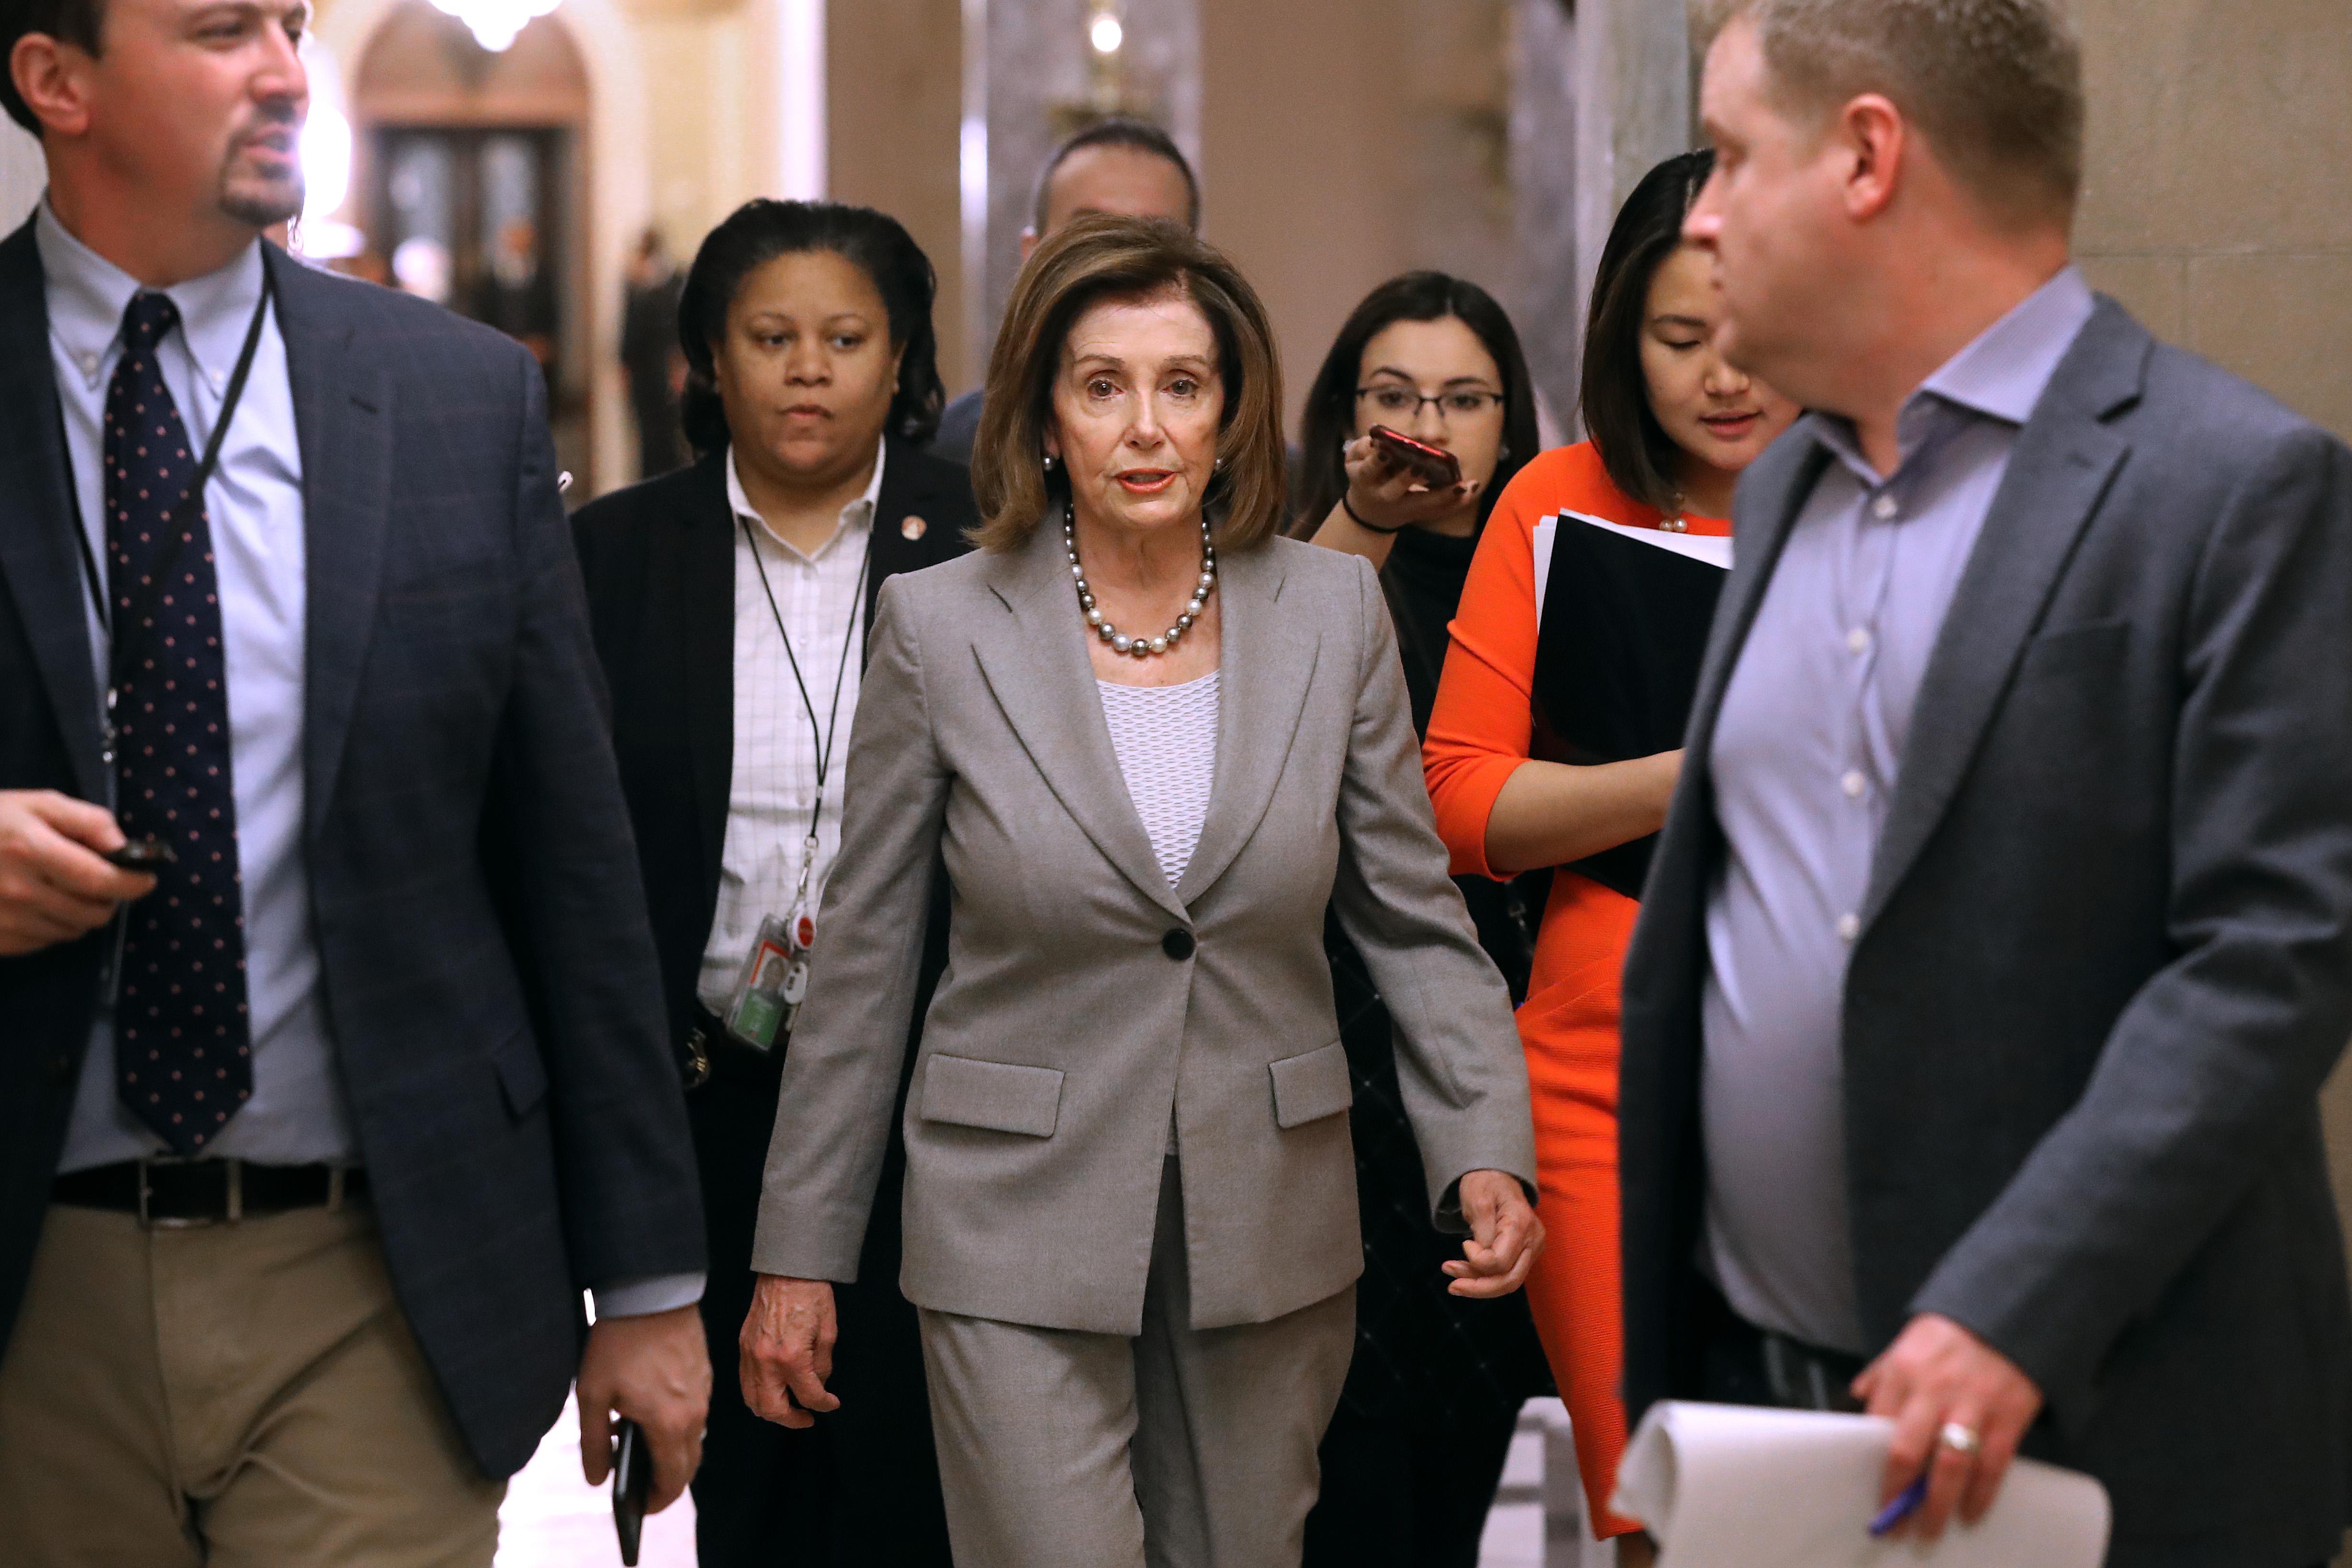 Speaker of the House Nancy Pelosi walks through the Capitol surrounded by people.